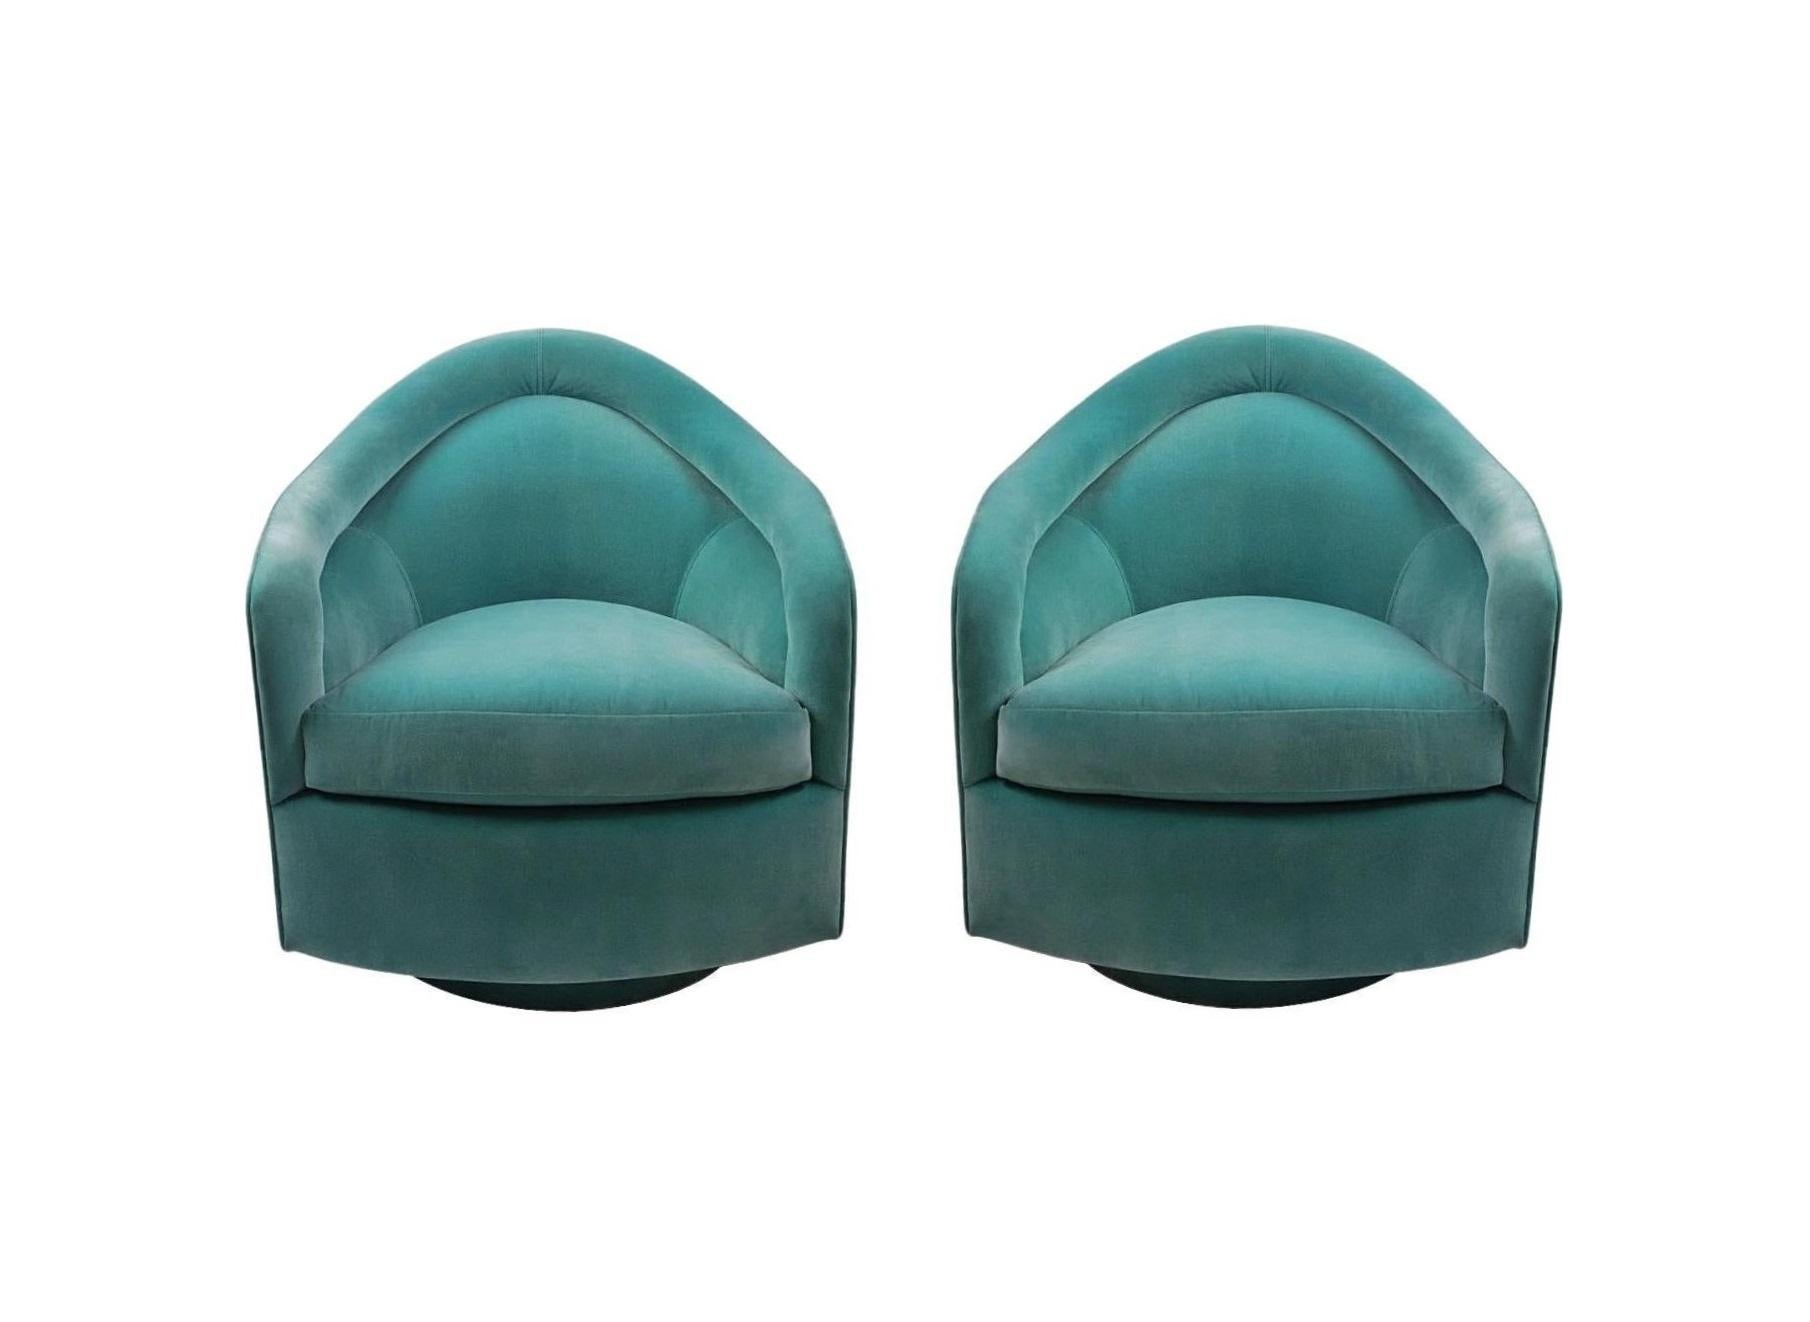 Inviting pair of matching Tear Drop swivel-tilt chairs by American modernist Milo Baughman and manufactured by Thayer Coggin, circa 1970s. Revolutionary construction featuring an enveloping barrel-back set on a plinth base that supports tilt swivel